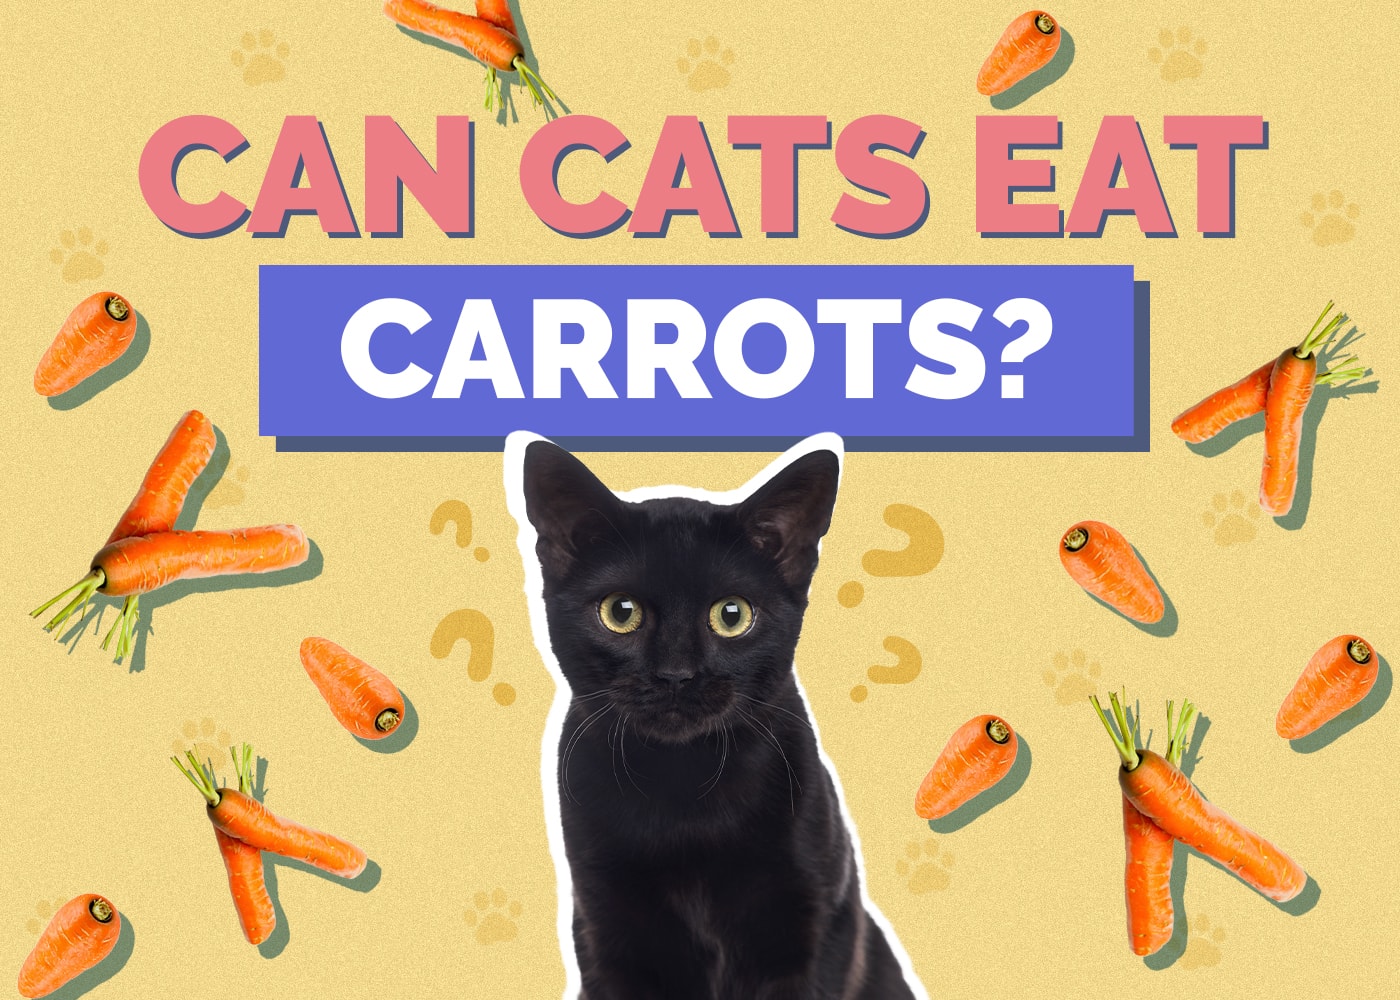 Can Cats Eat carrots